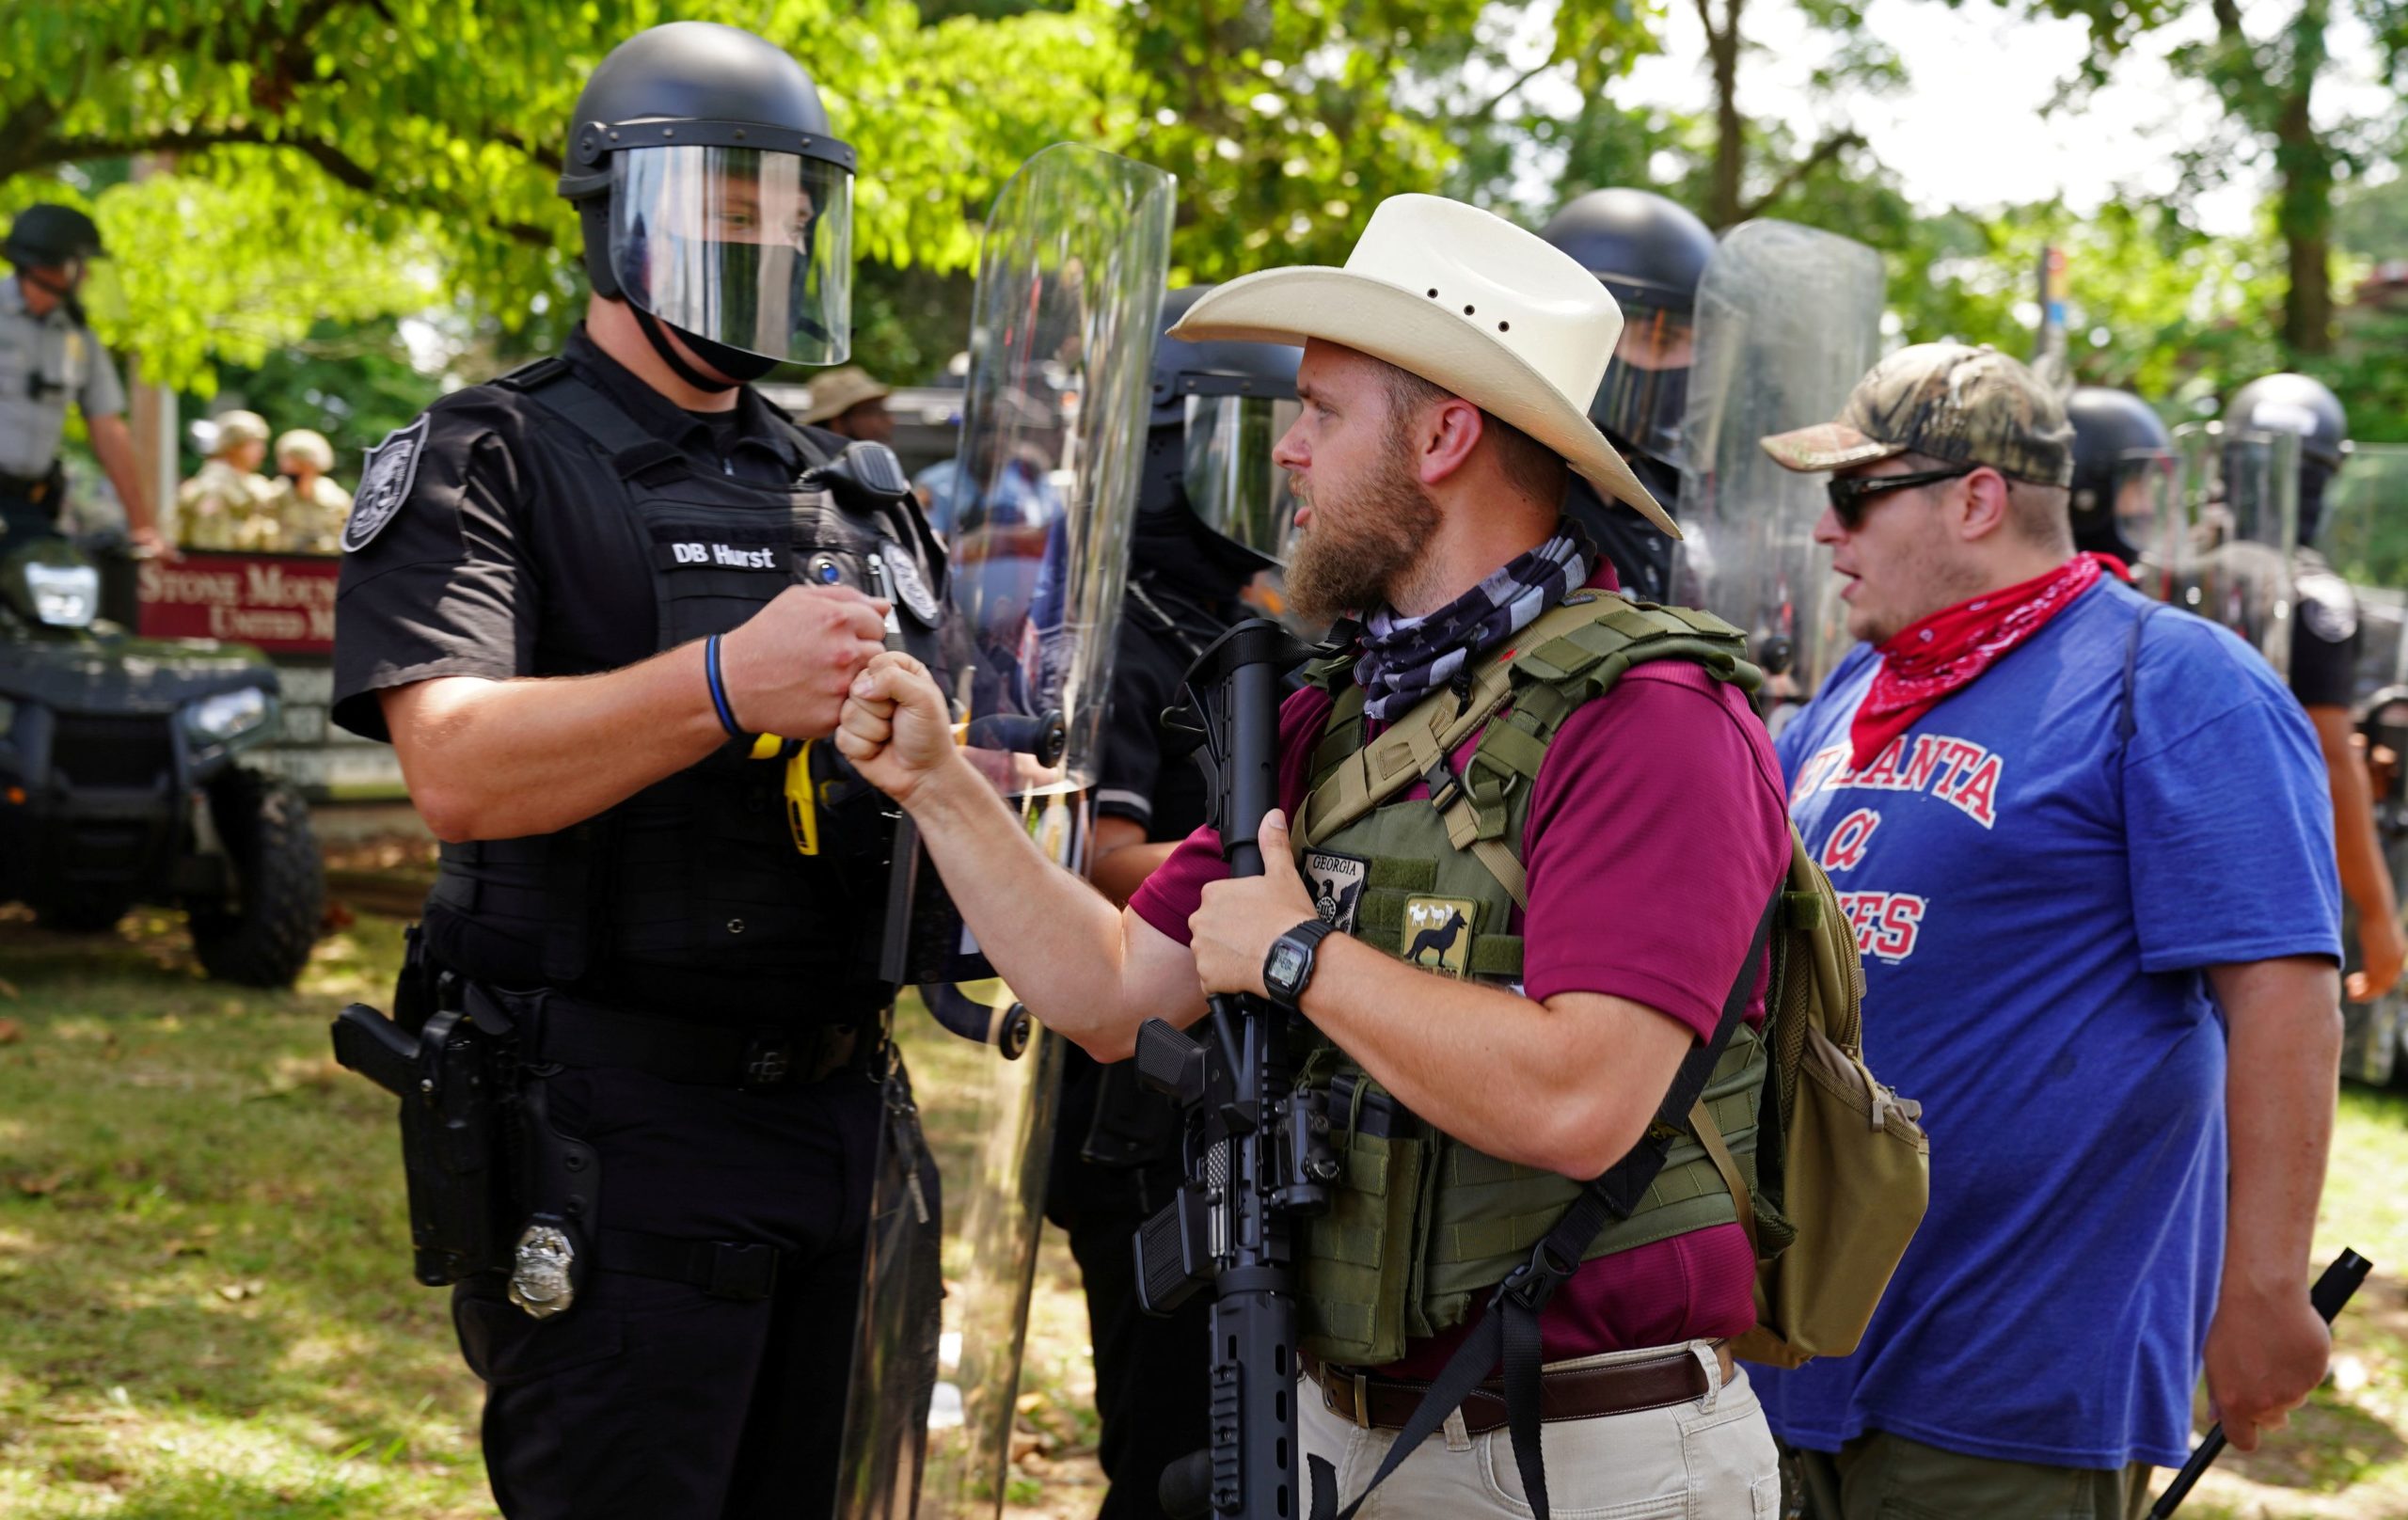 Chatting the Pictures: Militia Fist Bump With Riot Cop at Stone Mountain